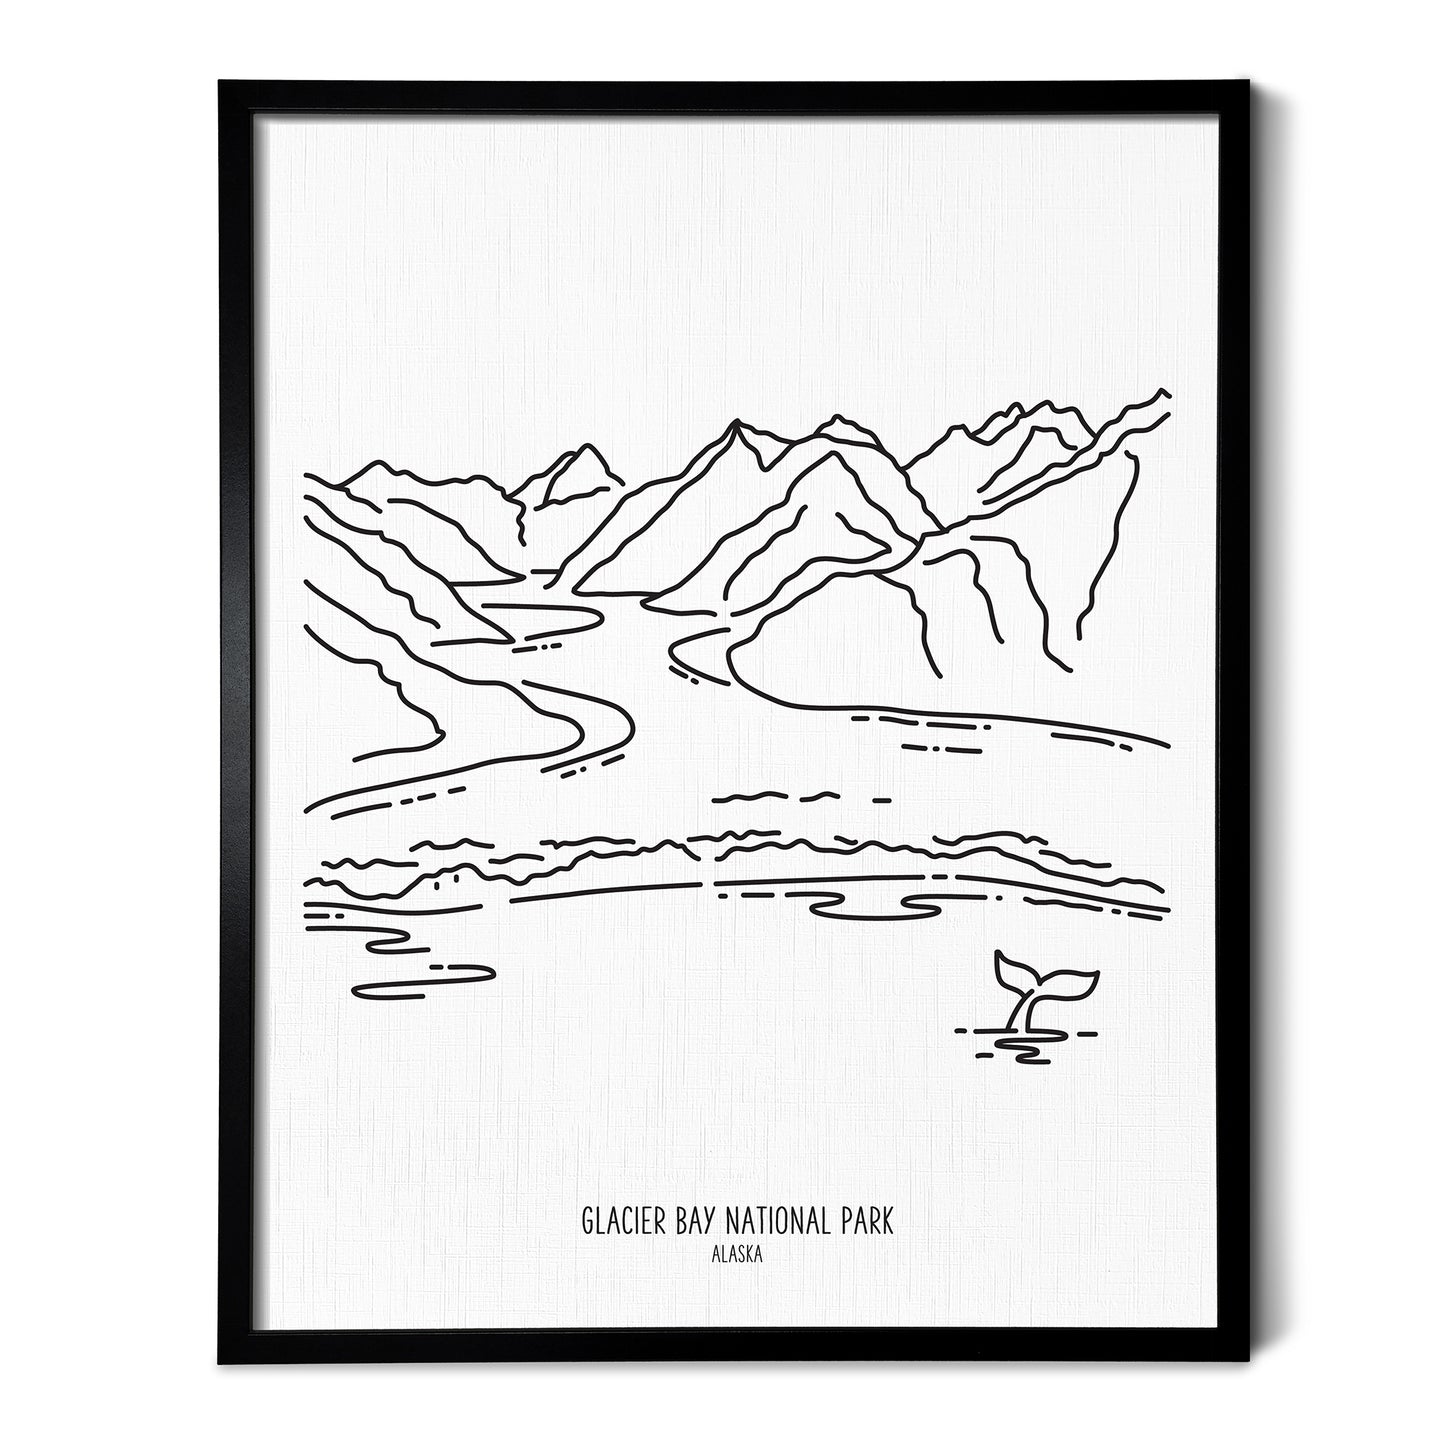 A line art drawing of Glacier Bay National Park on white linen paper in a thin black picture frame